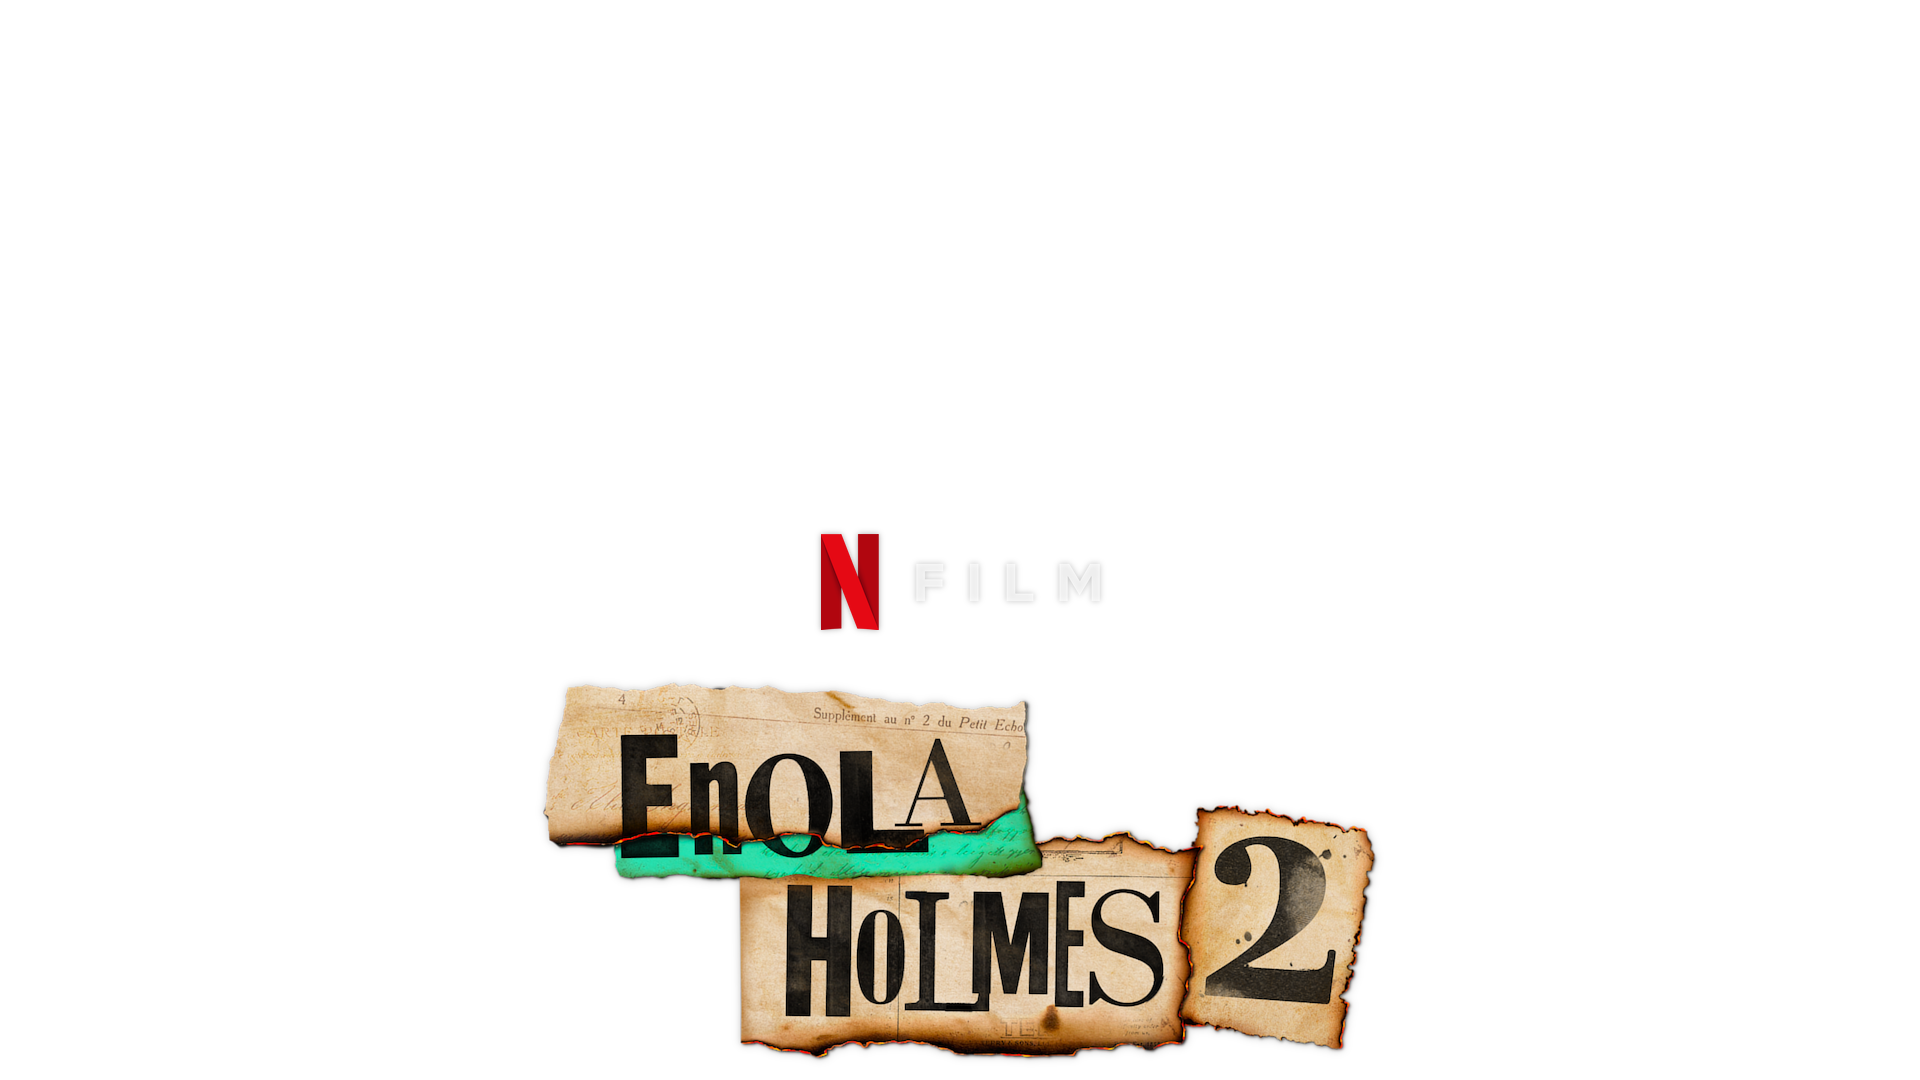 Enola Holmes 2 Cast, News, Videos and more photo